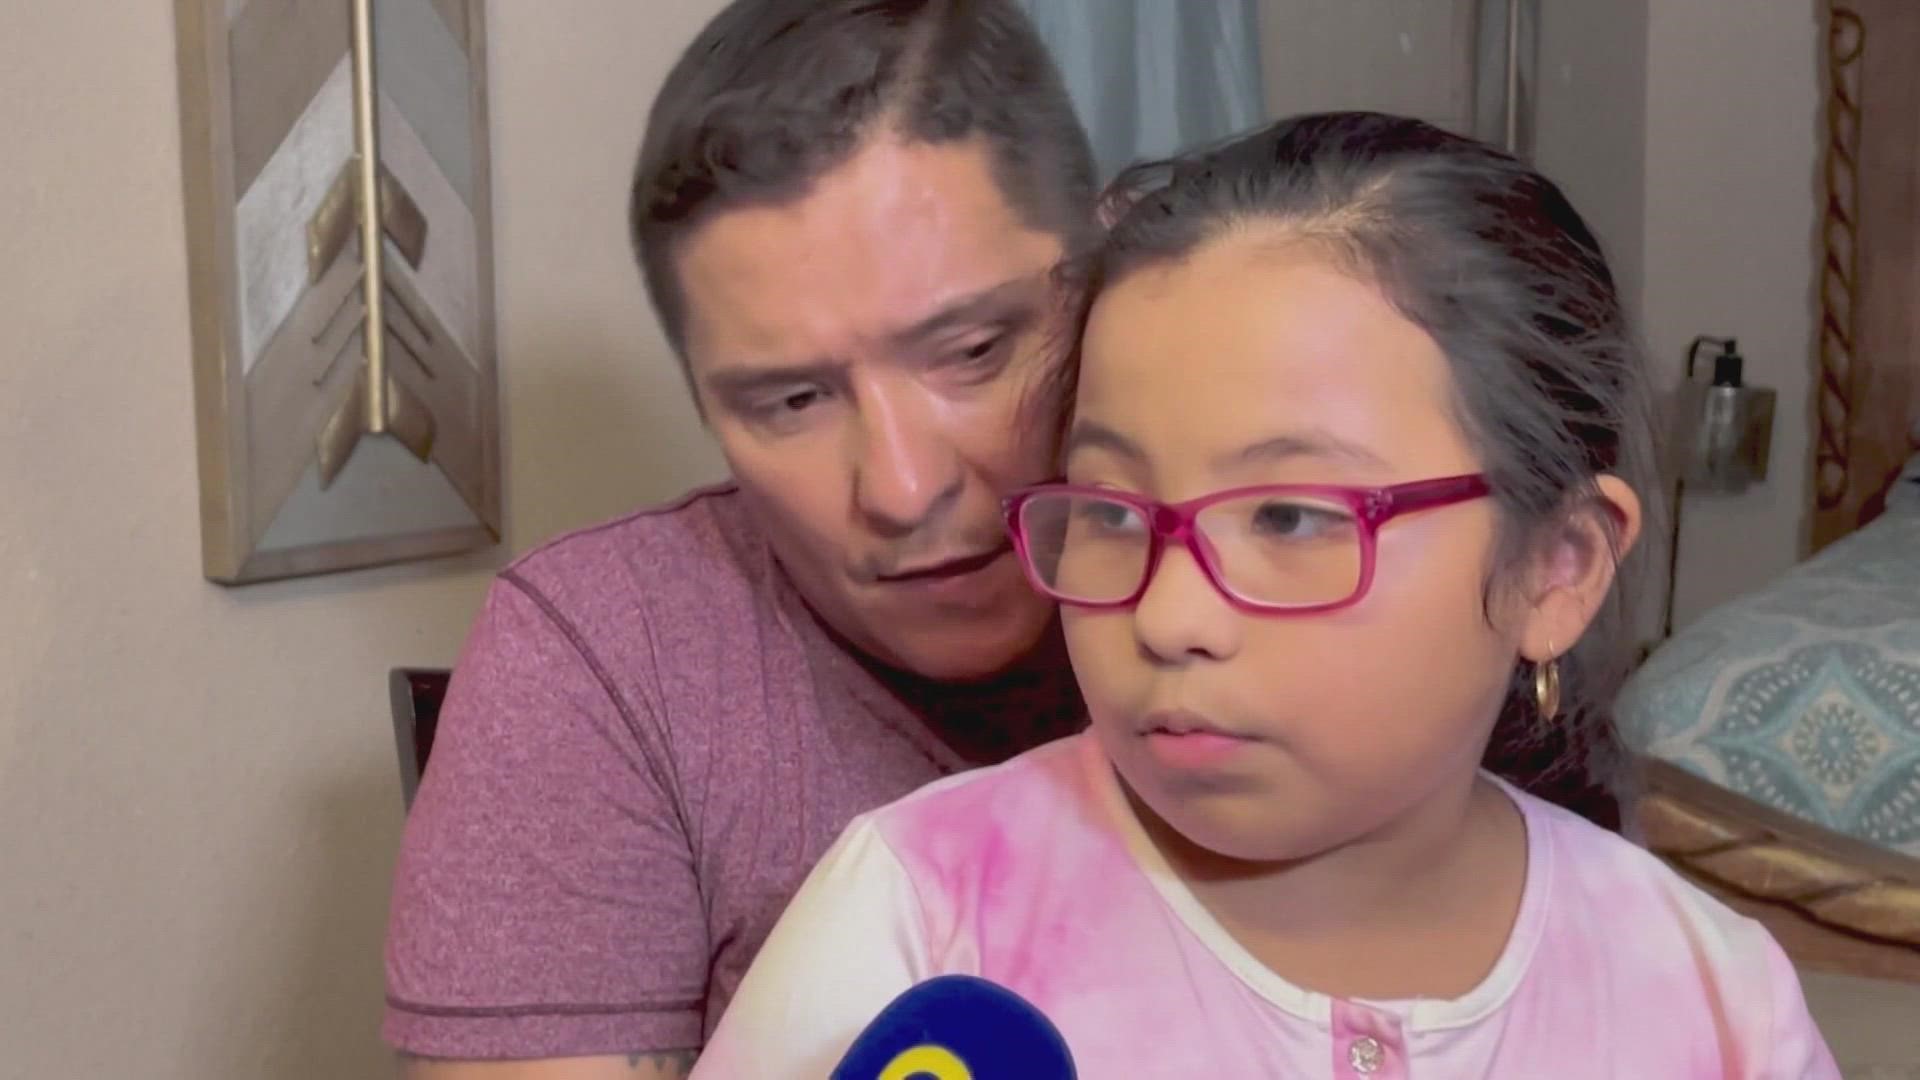 9-year-old Eliana Fierro said children were hiding behind a curtain when a man told them to come out, but the children knew it wasn't a police officer.